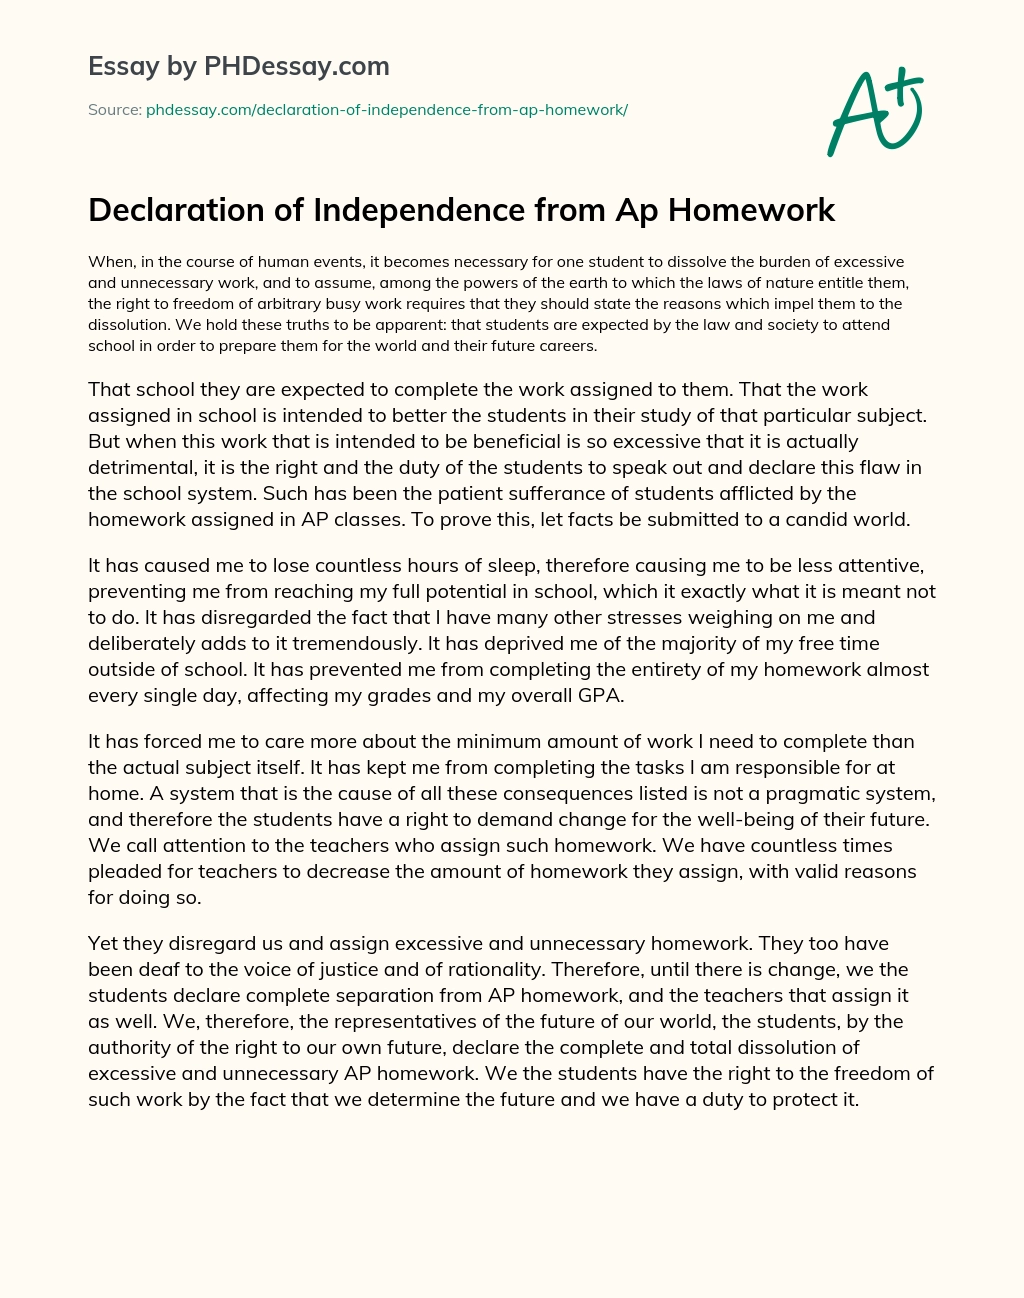 Declaration of Independence from Ap Homework essay